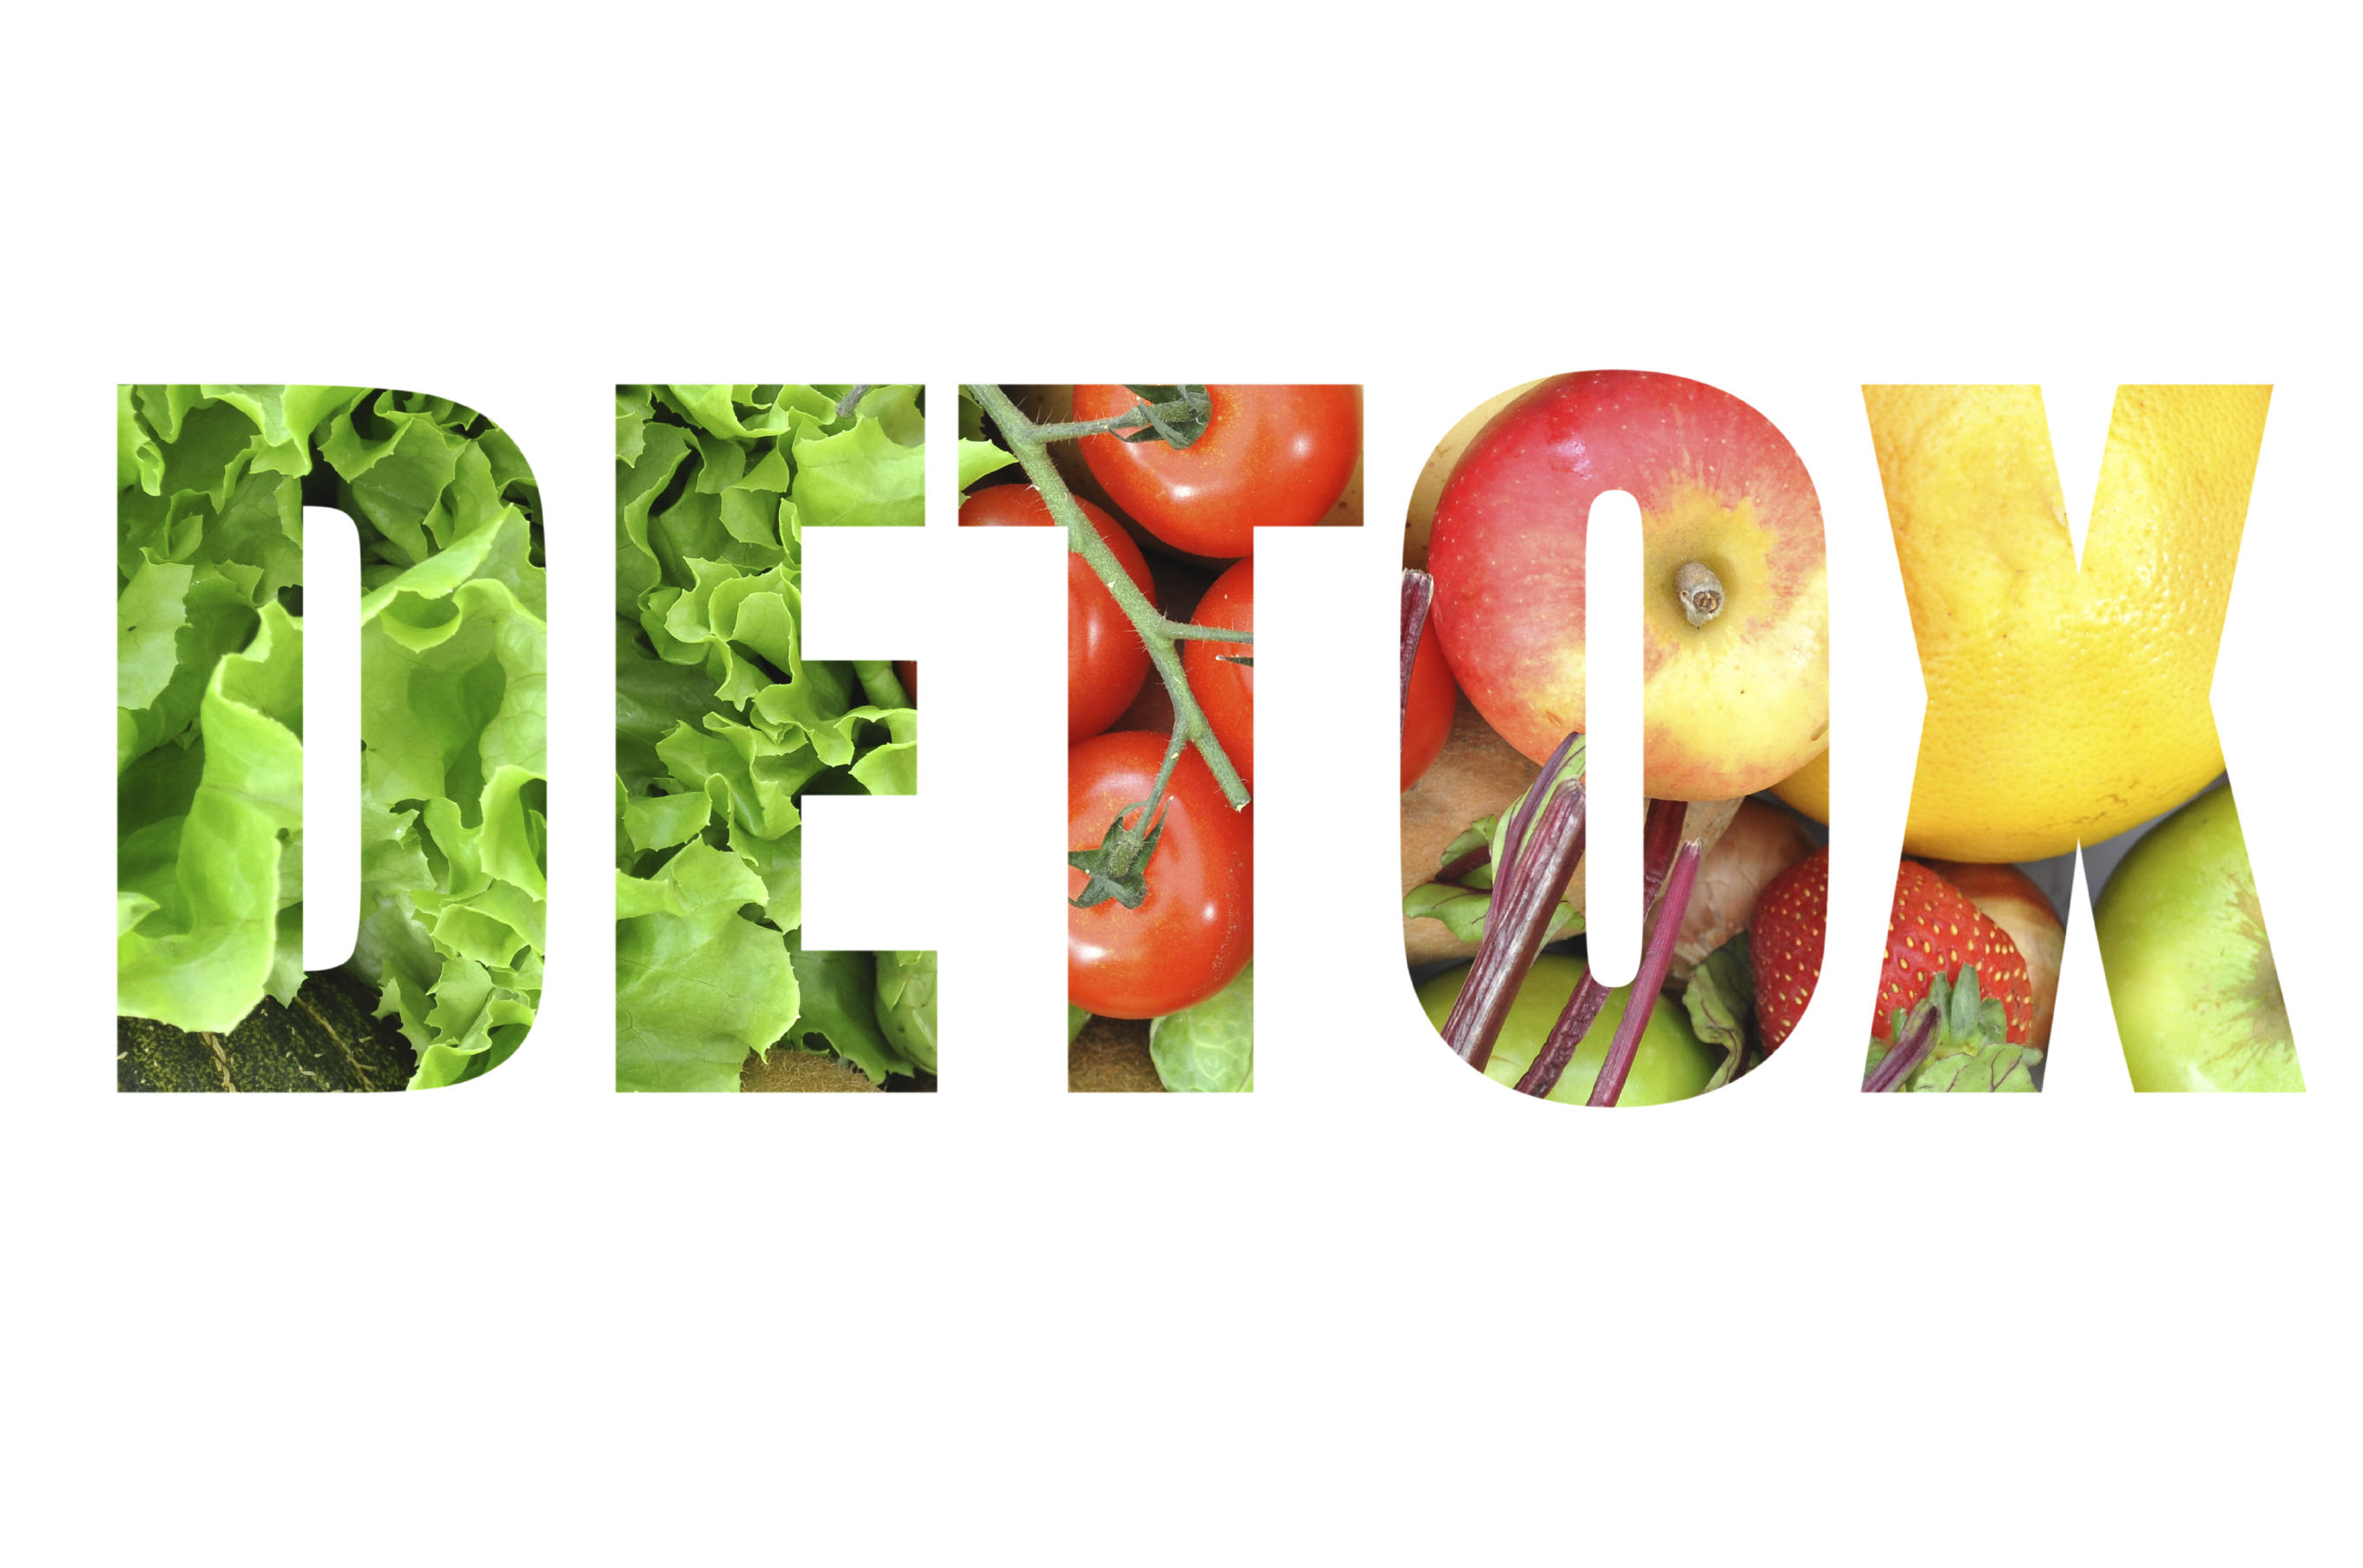 Debunking the Myth about Detoxing